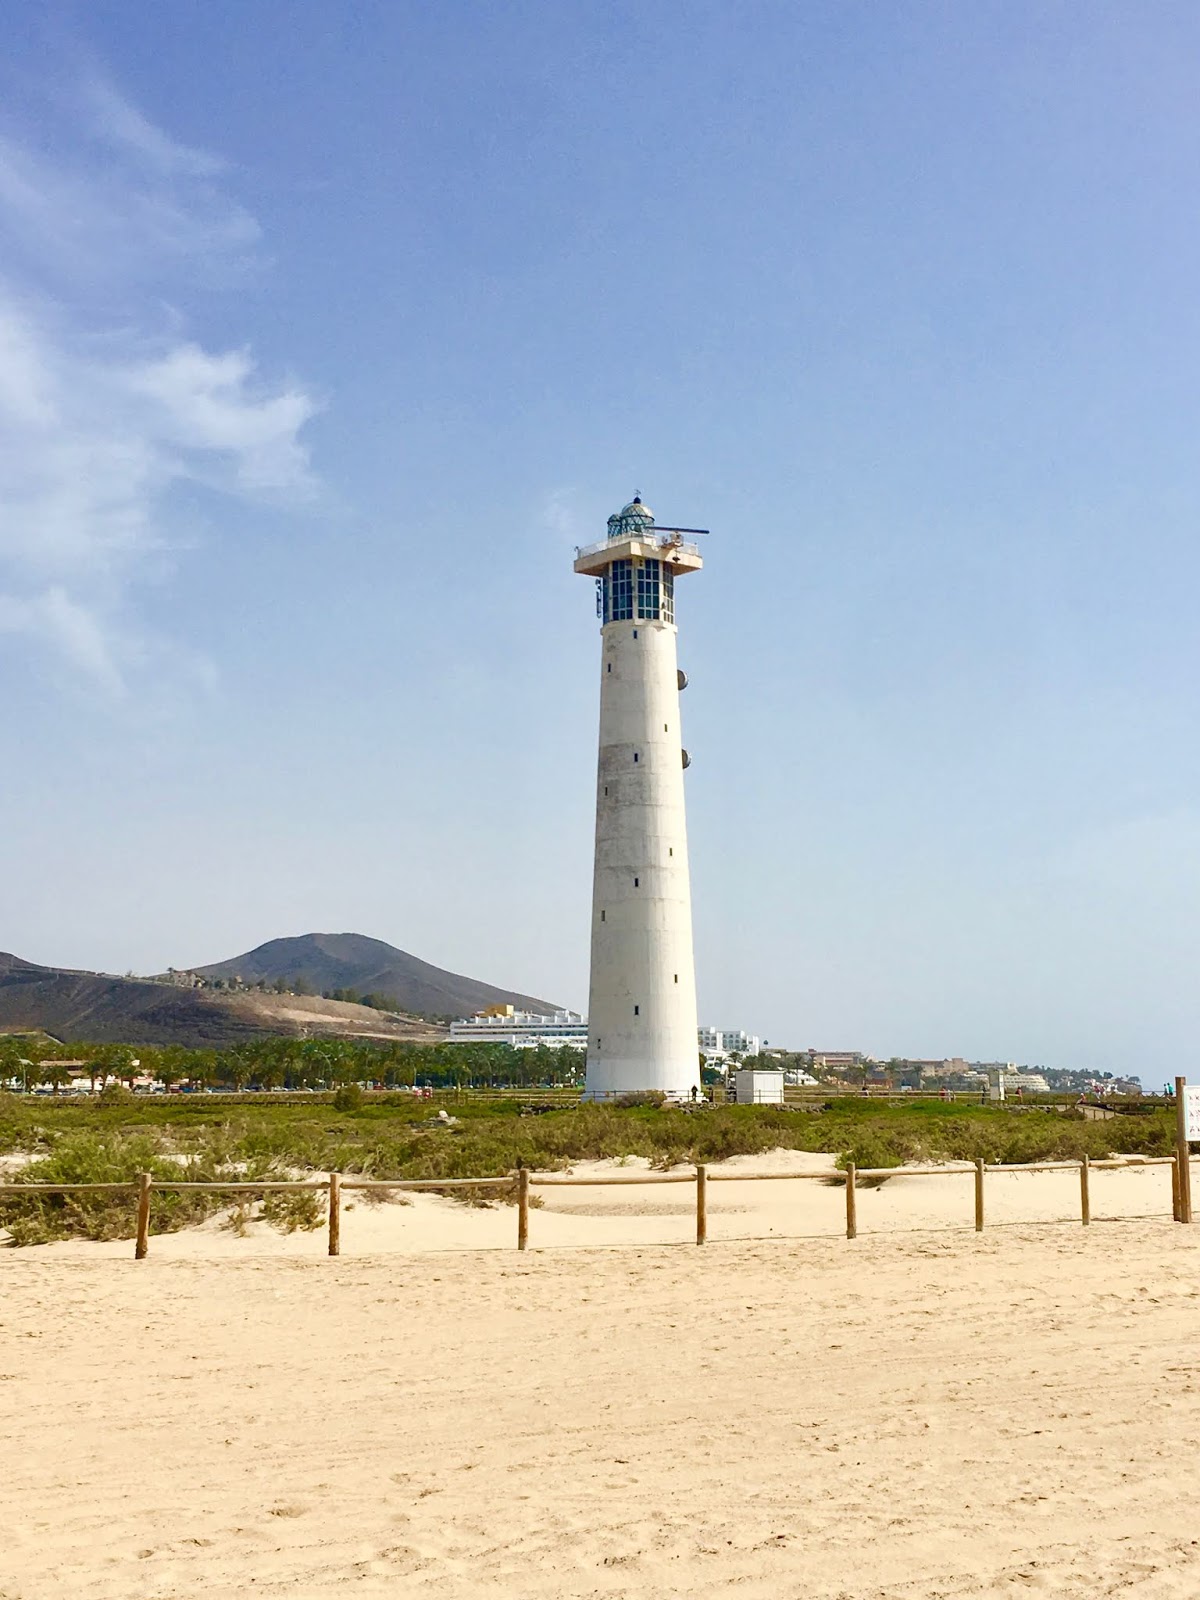 best things to do in fuerteventura, what to do in fuerteventura, fuerteventura, fuerteventura things to do, fuerteventura holiday, canary islands things to do, travel blog